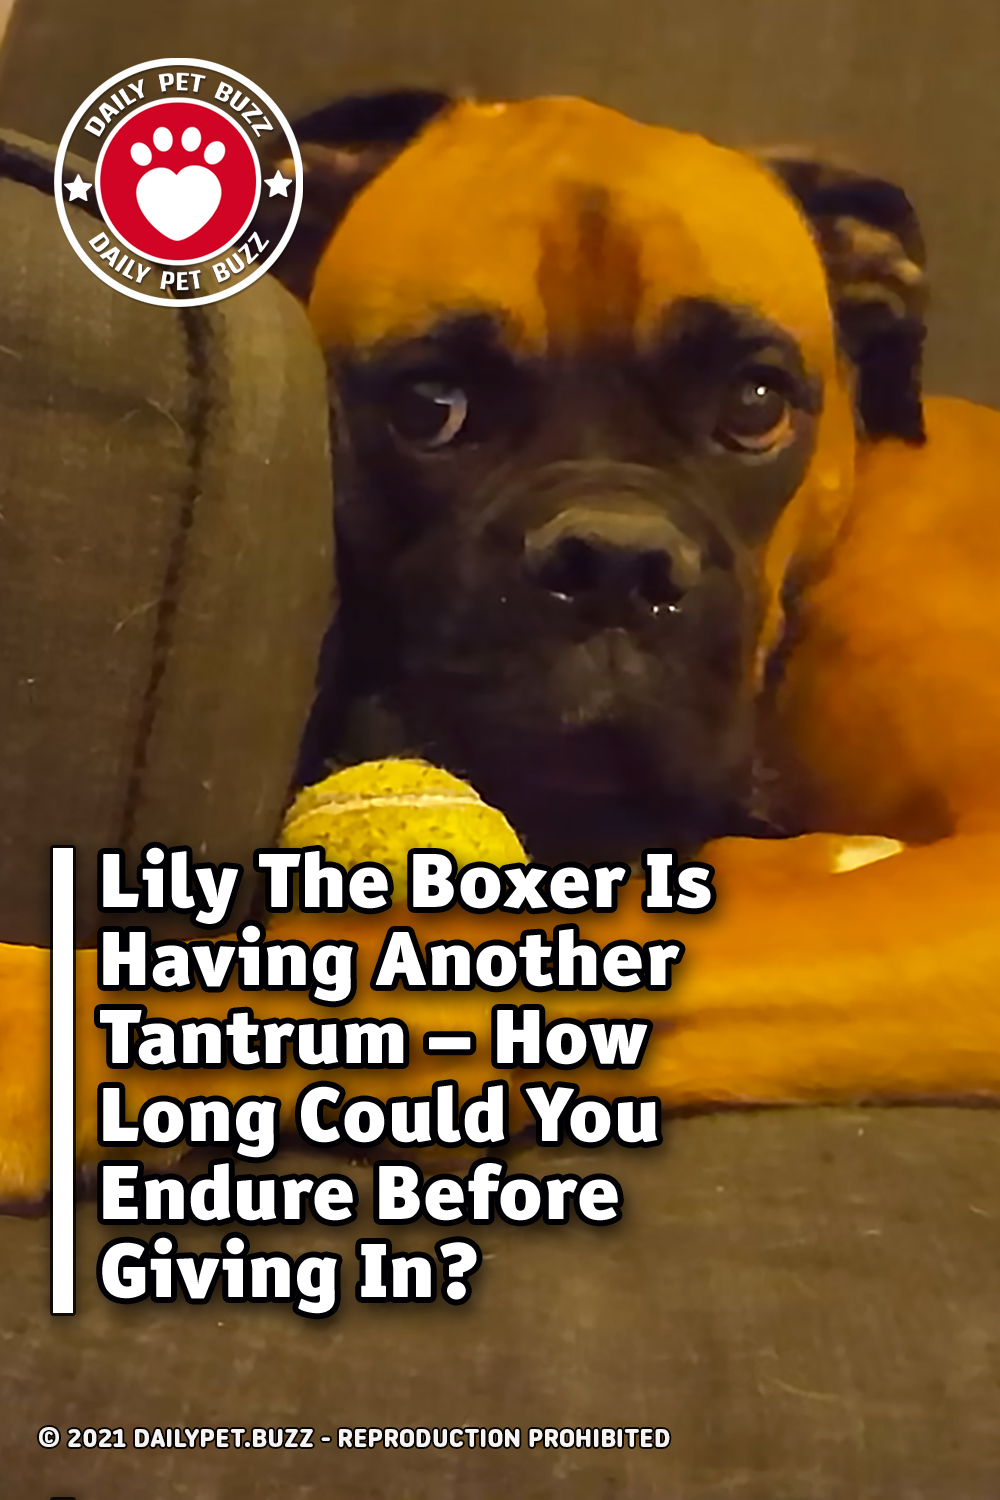 Lily The Boxer Is Having Another Tantrum – How Long Could You Endure Before Giving In?